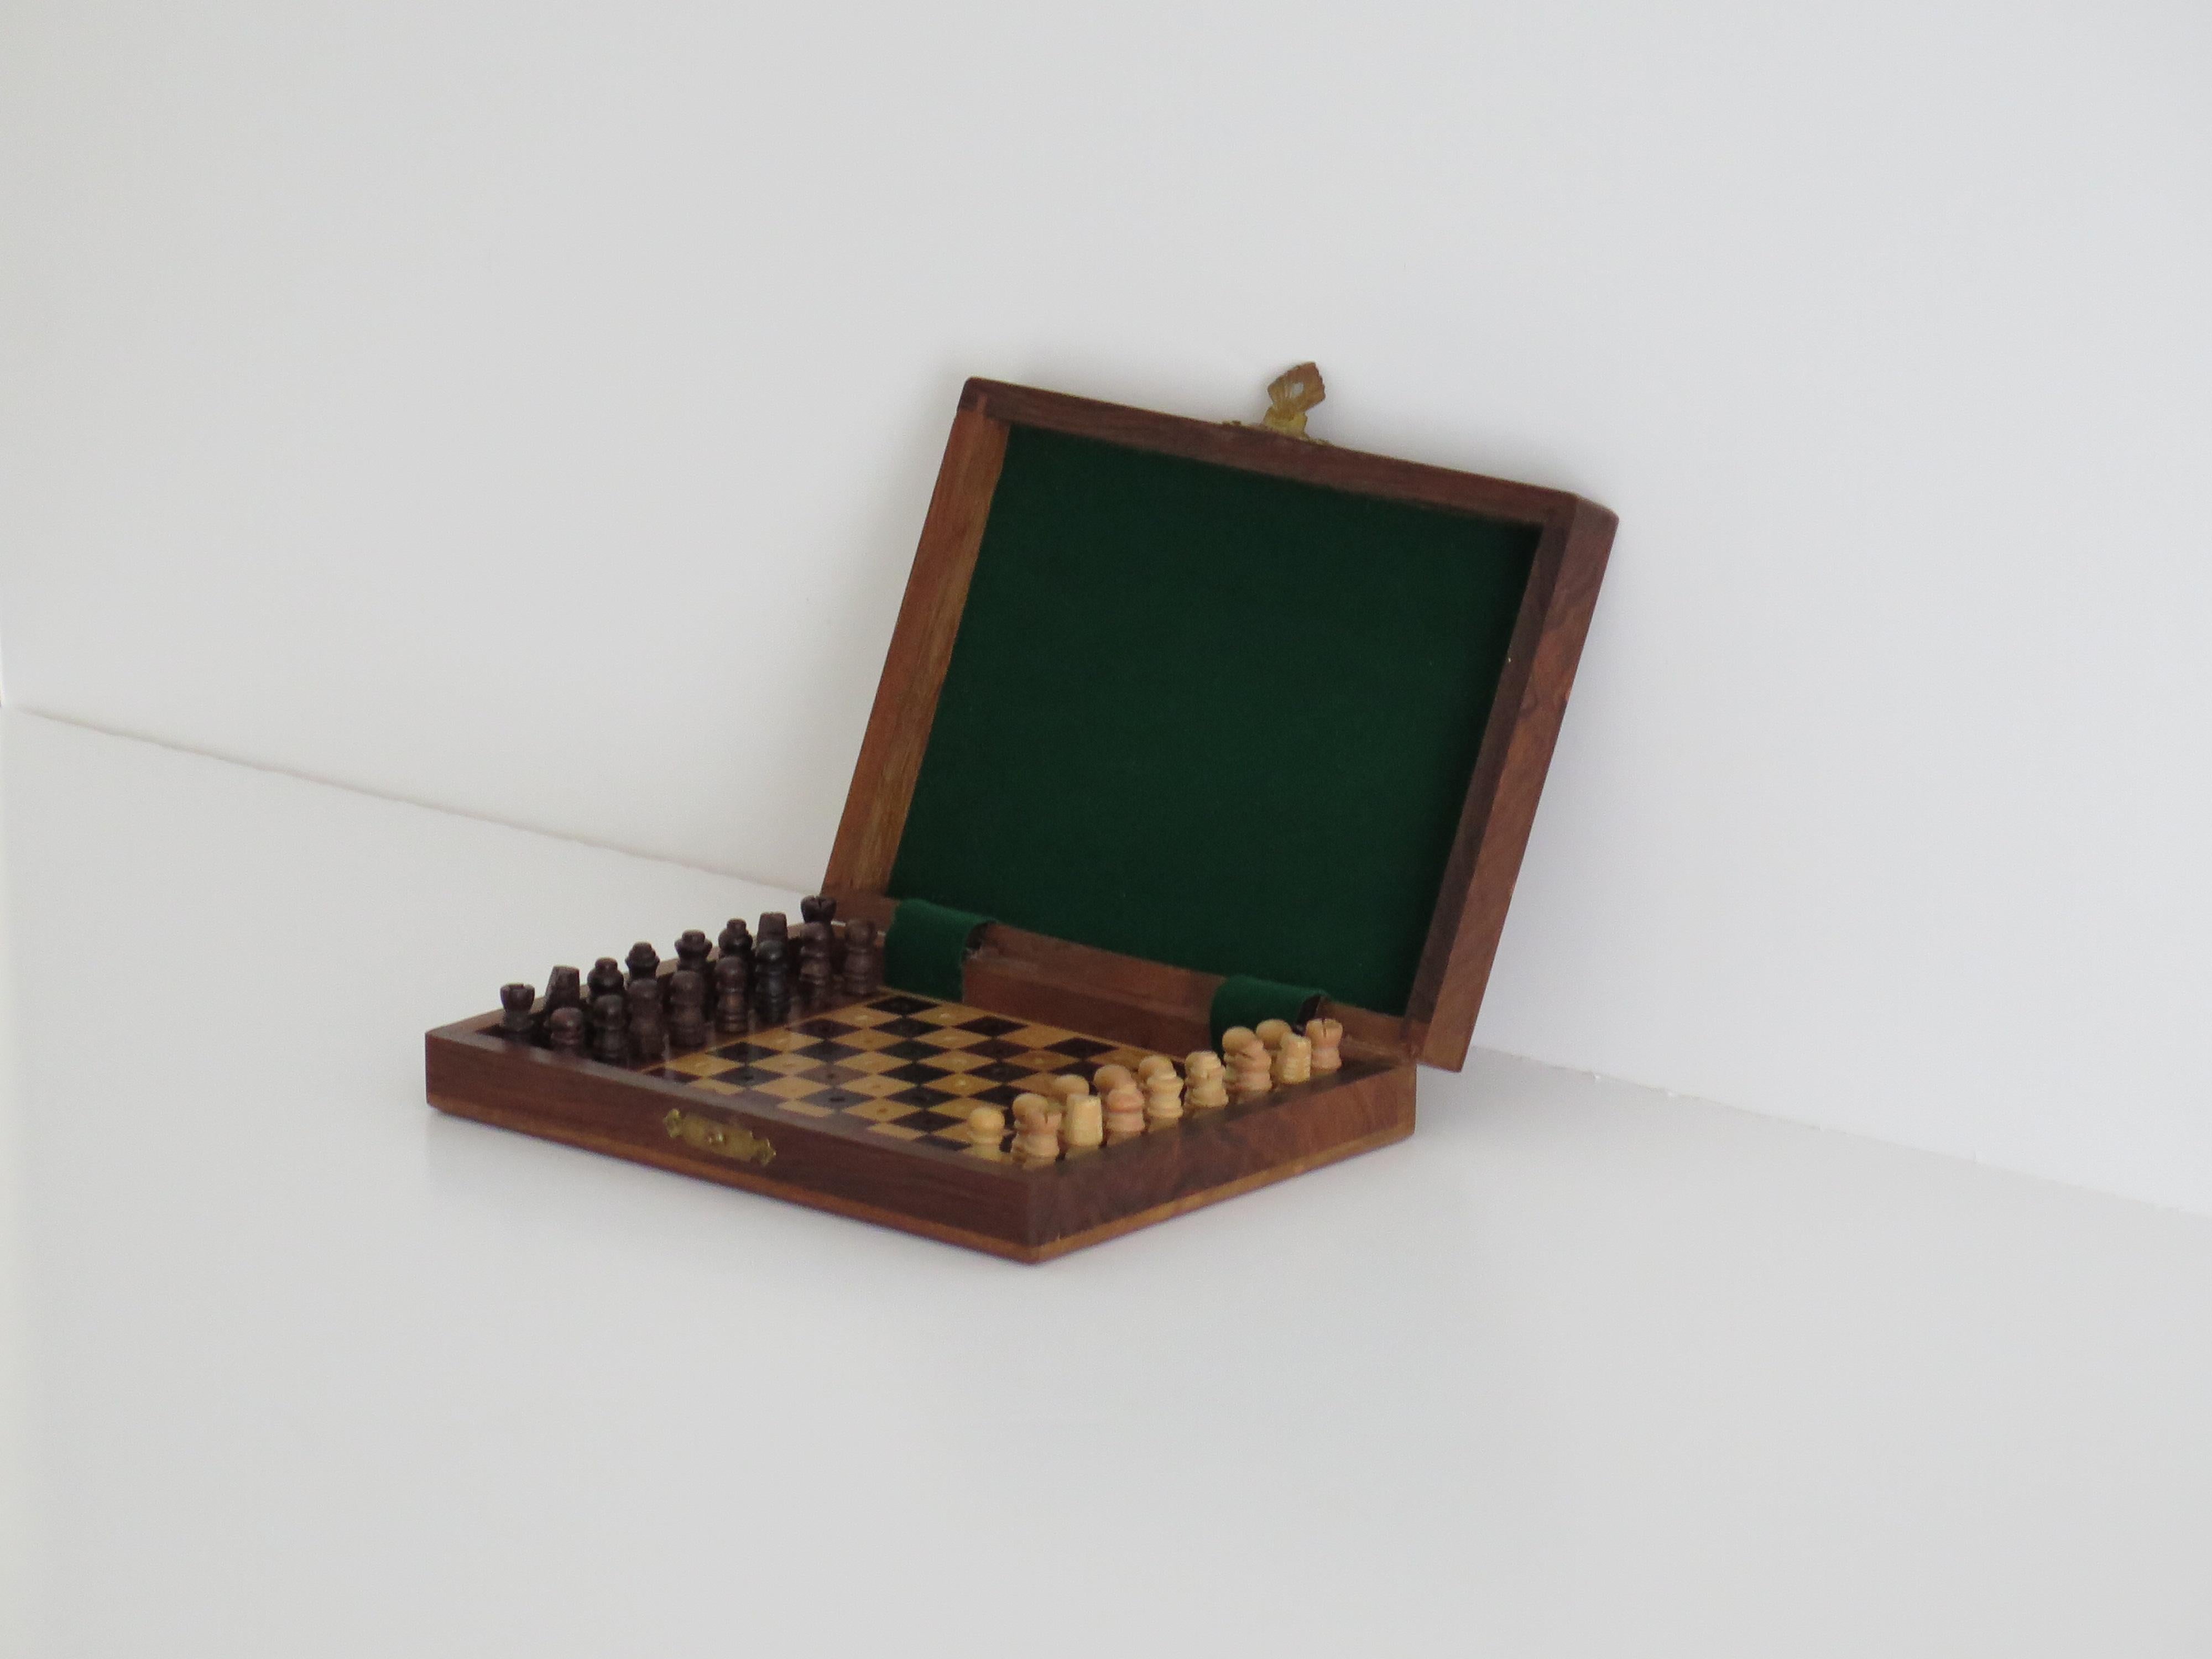 Hand-Crafted Handmade Miniature Travelling Chess Set Game walnut Inlaid box, circa 1920 For Sale